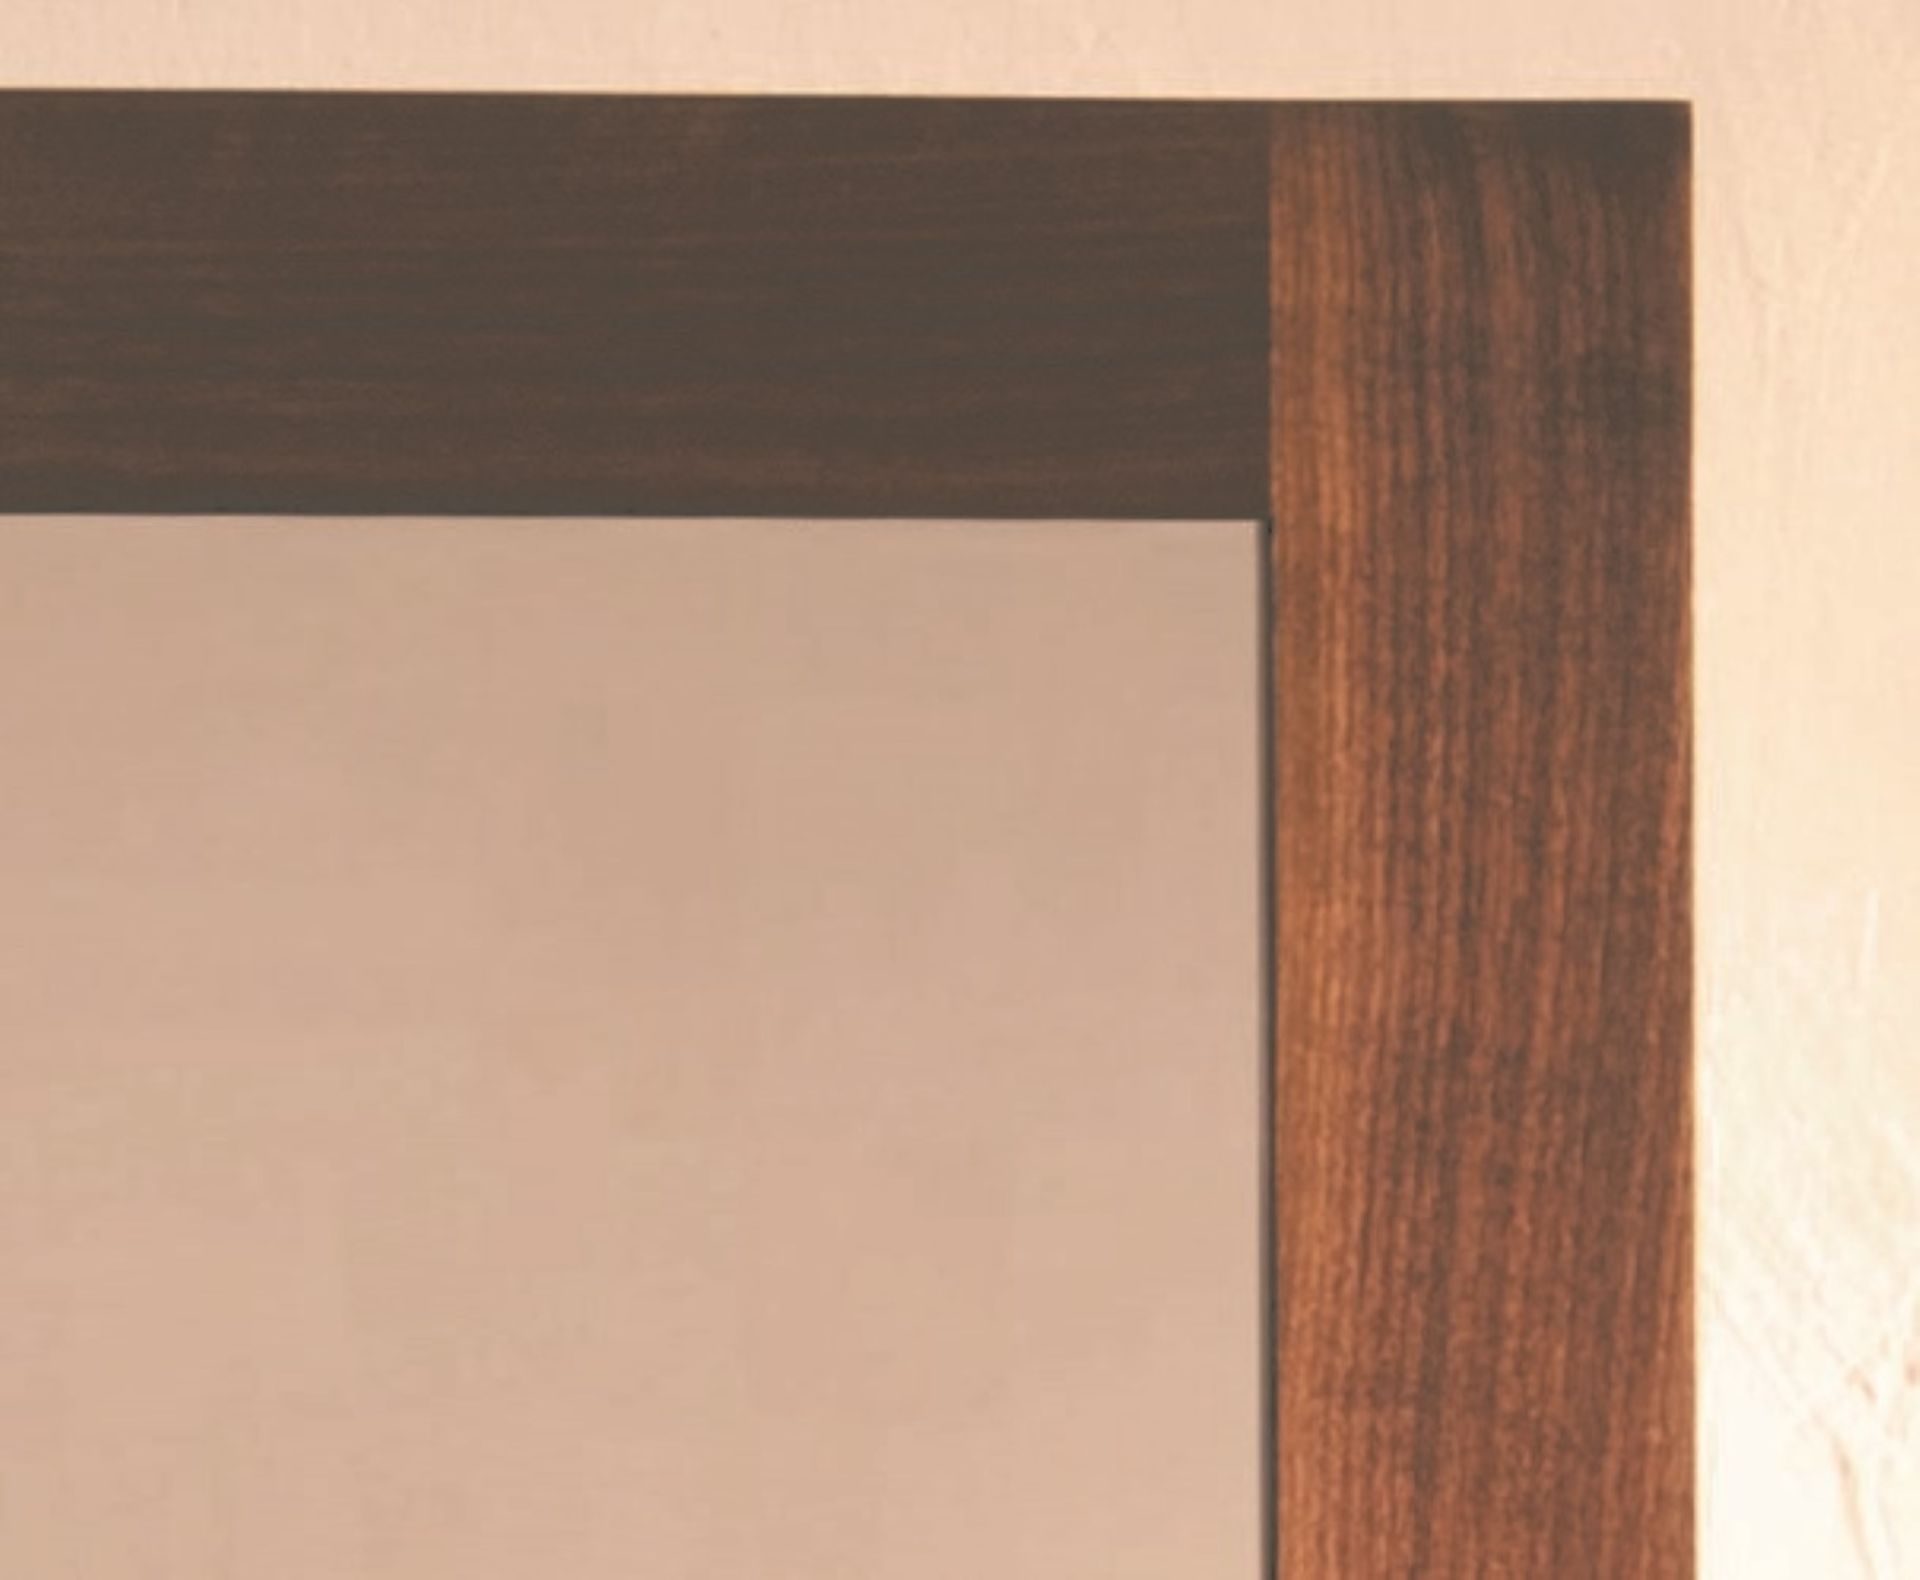 1 x Stonearth Bathroom Wall Mirror With Solid Walnut Frame and Bevelled Glass Mirror - Size Ex Large - Image 3 of 12